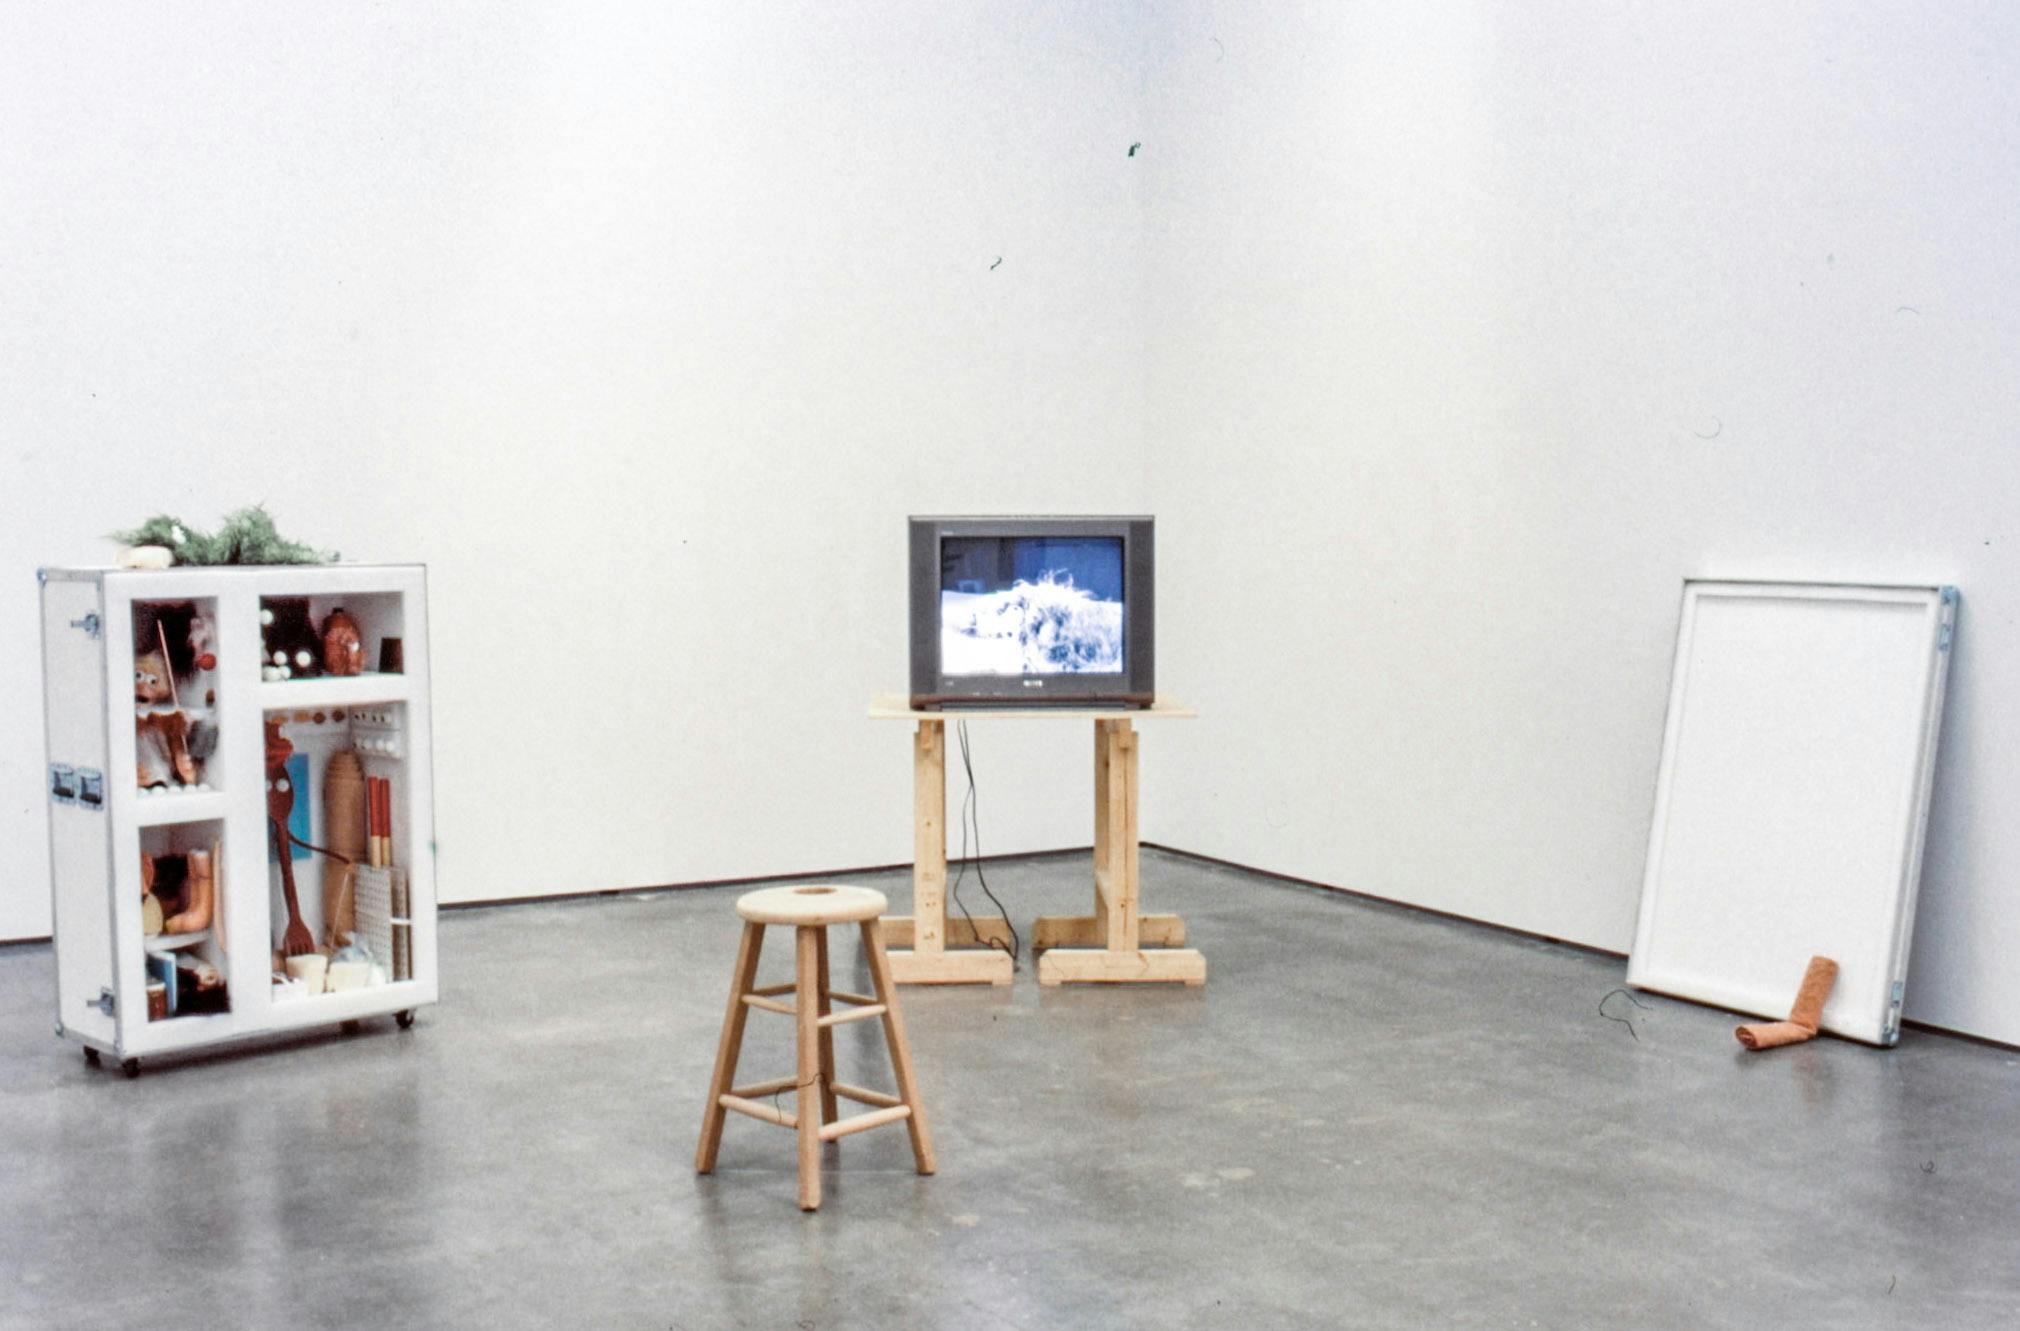 In a corner of a gallery room, a CRT TV is placed on a wood coffee table. A video work is shown on that TV. A mobile storage cabinet filled with objects is placed next to the TV. 